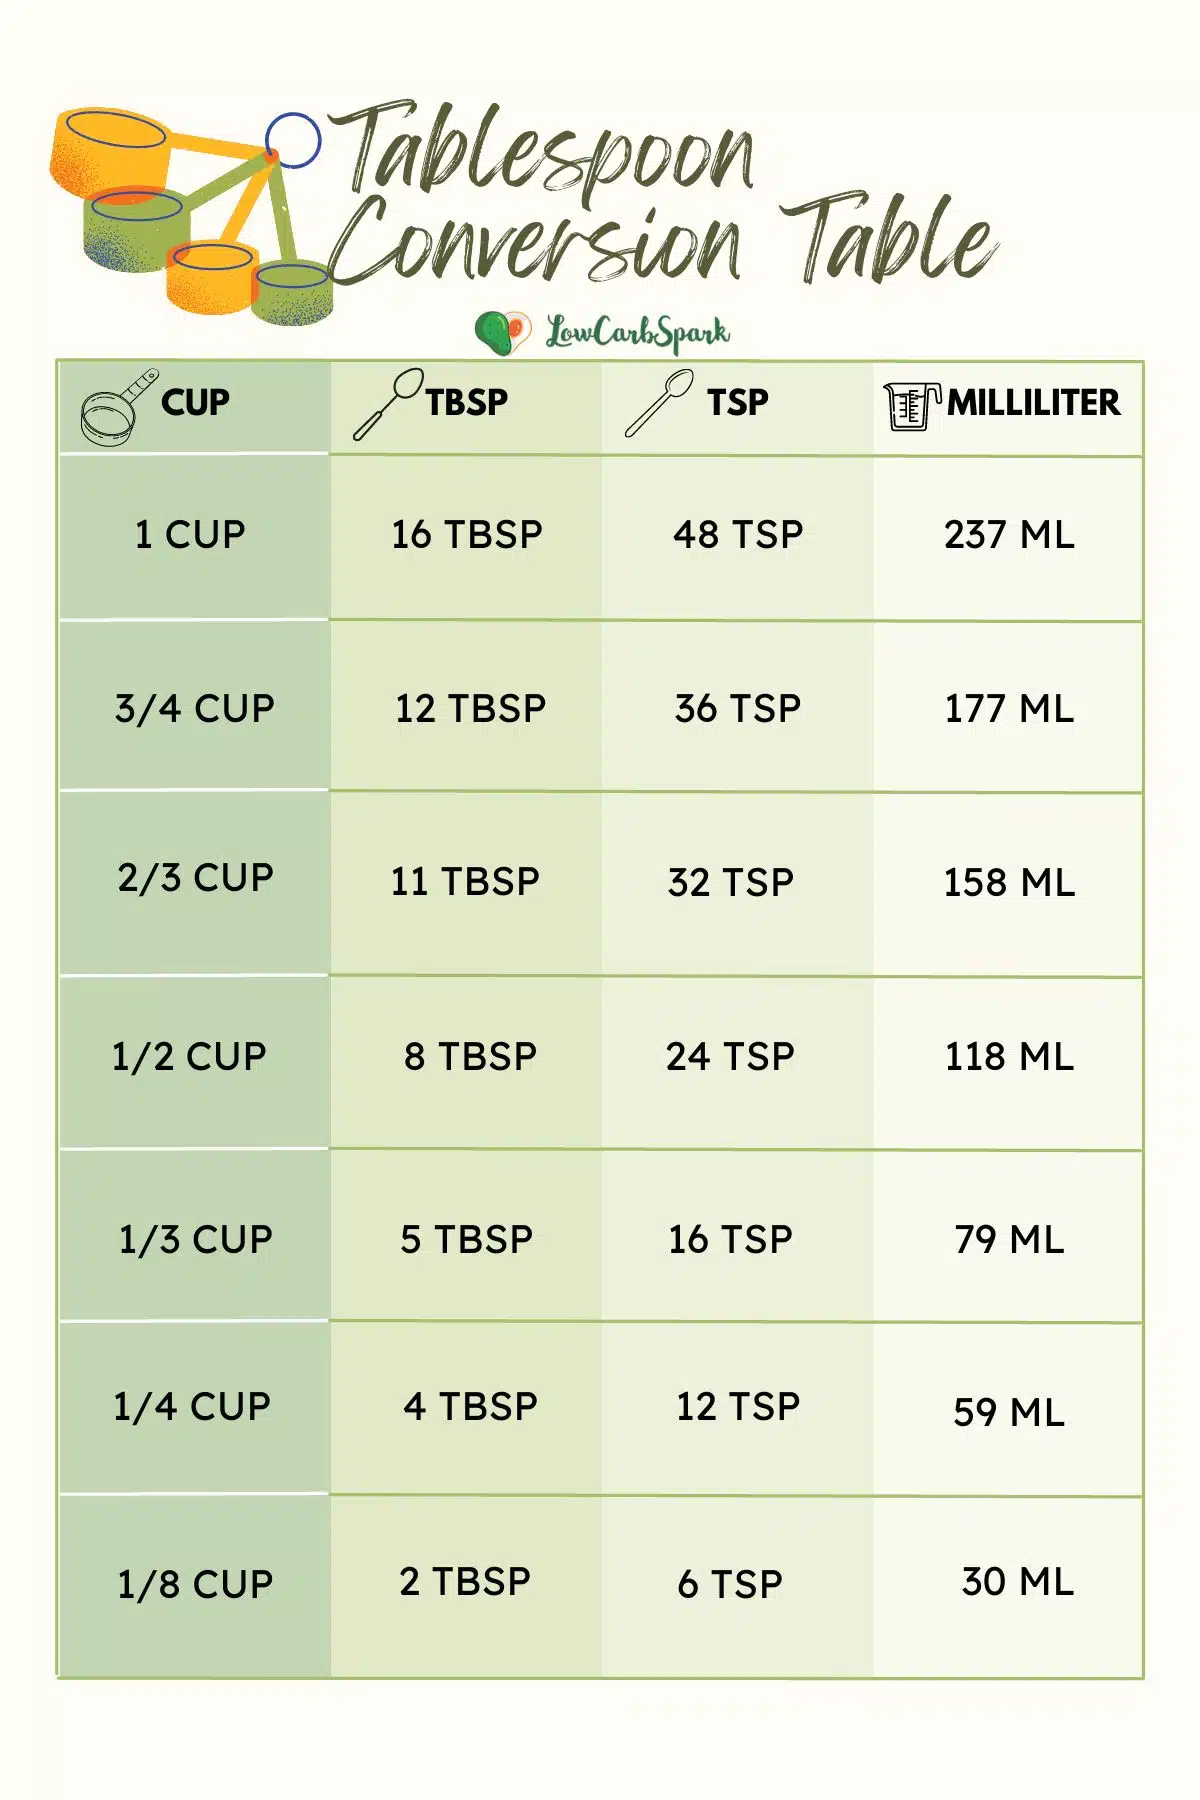 Tablespoon Conversion Table